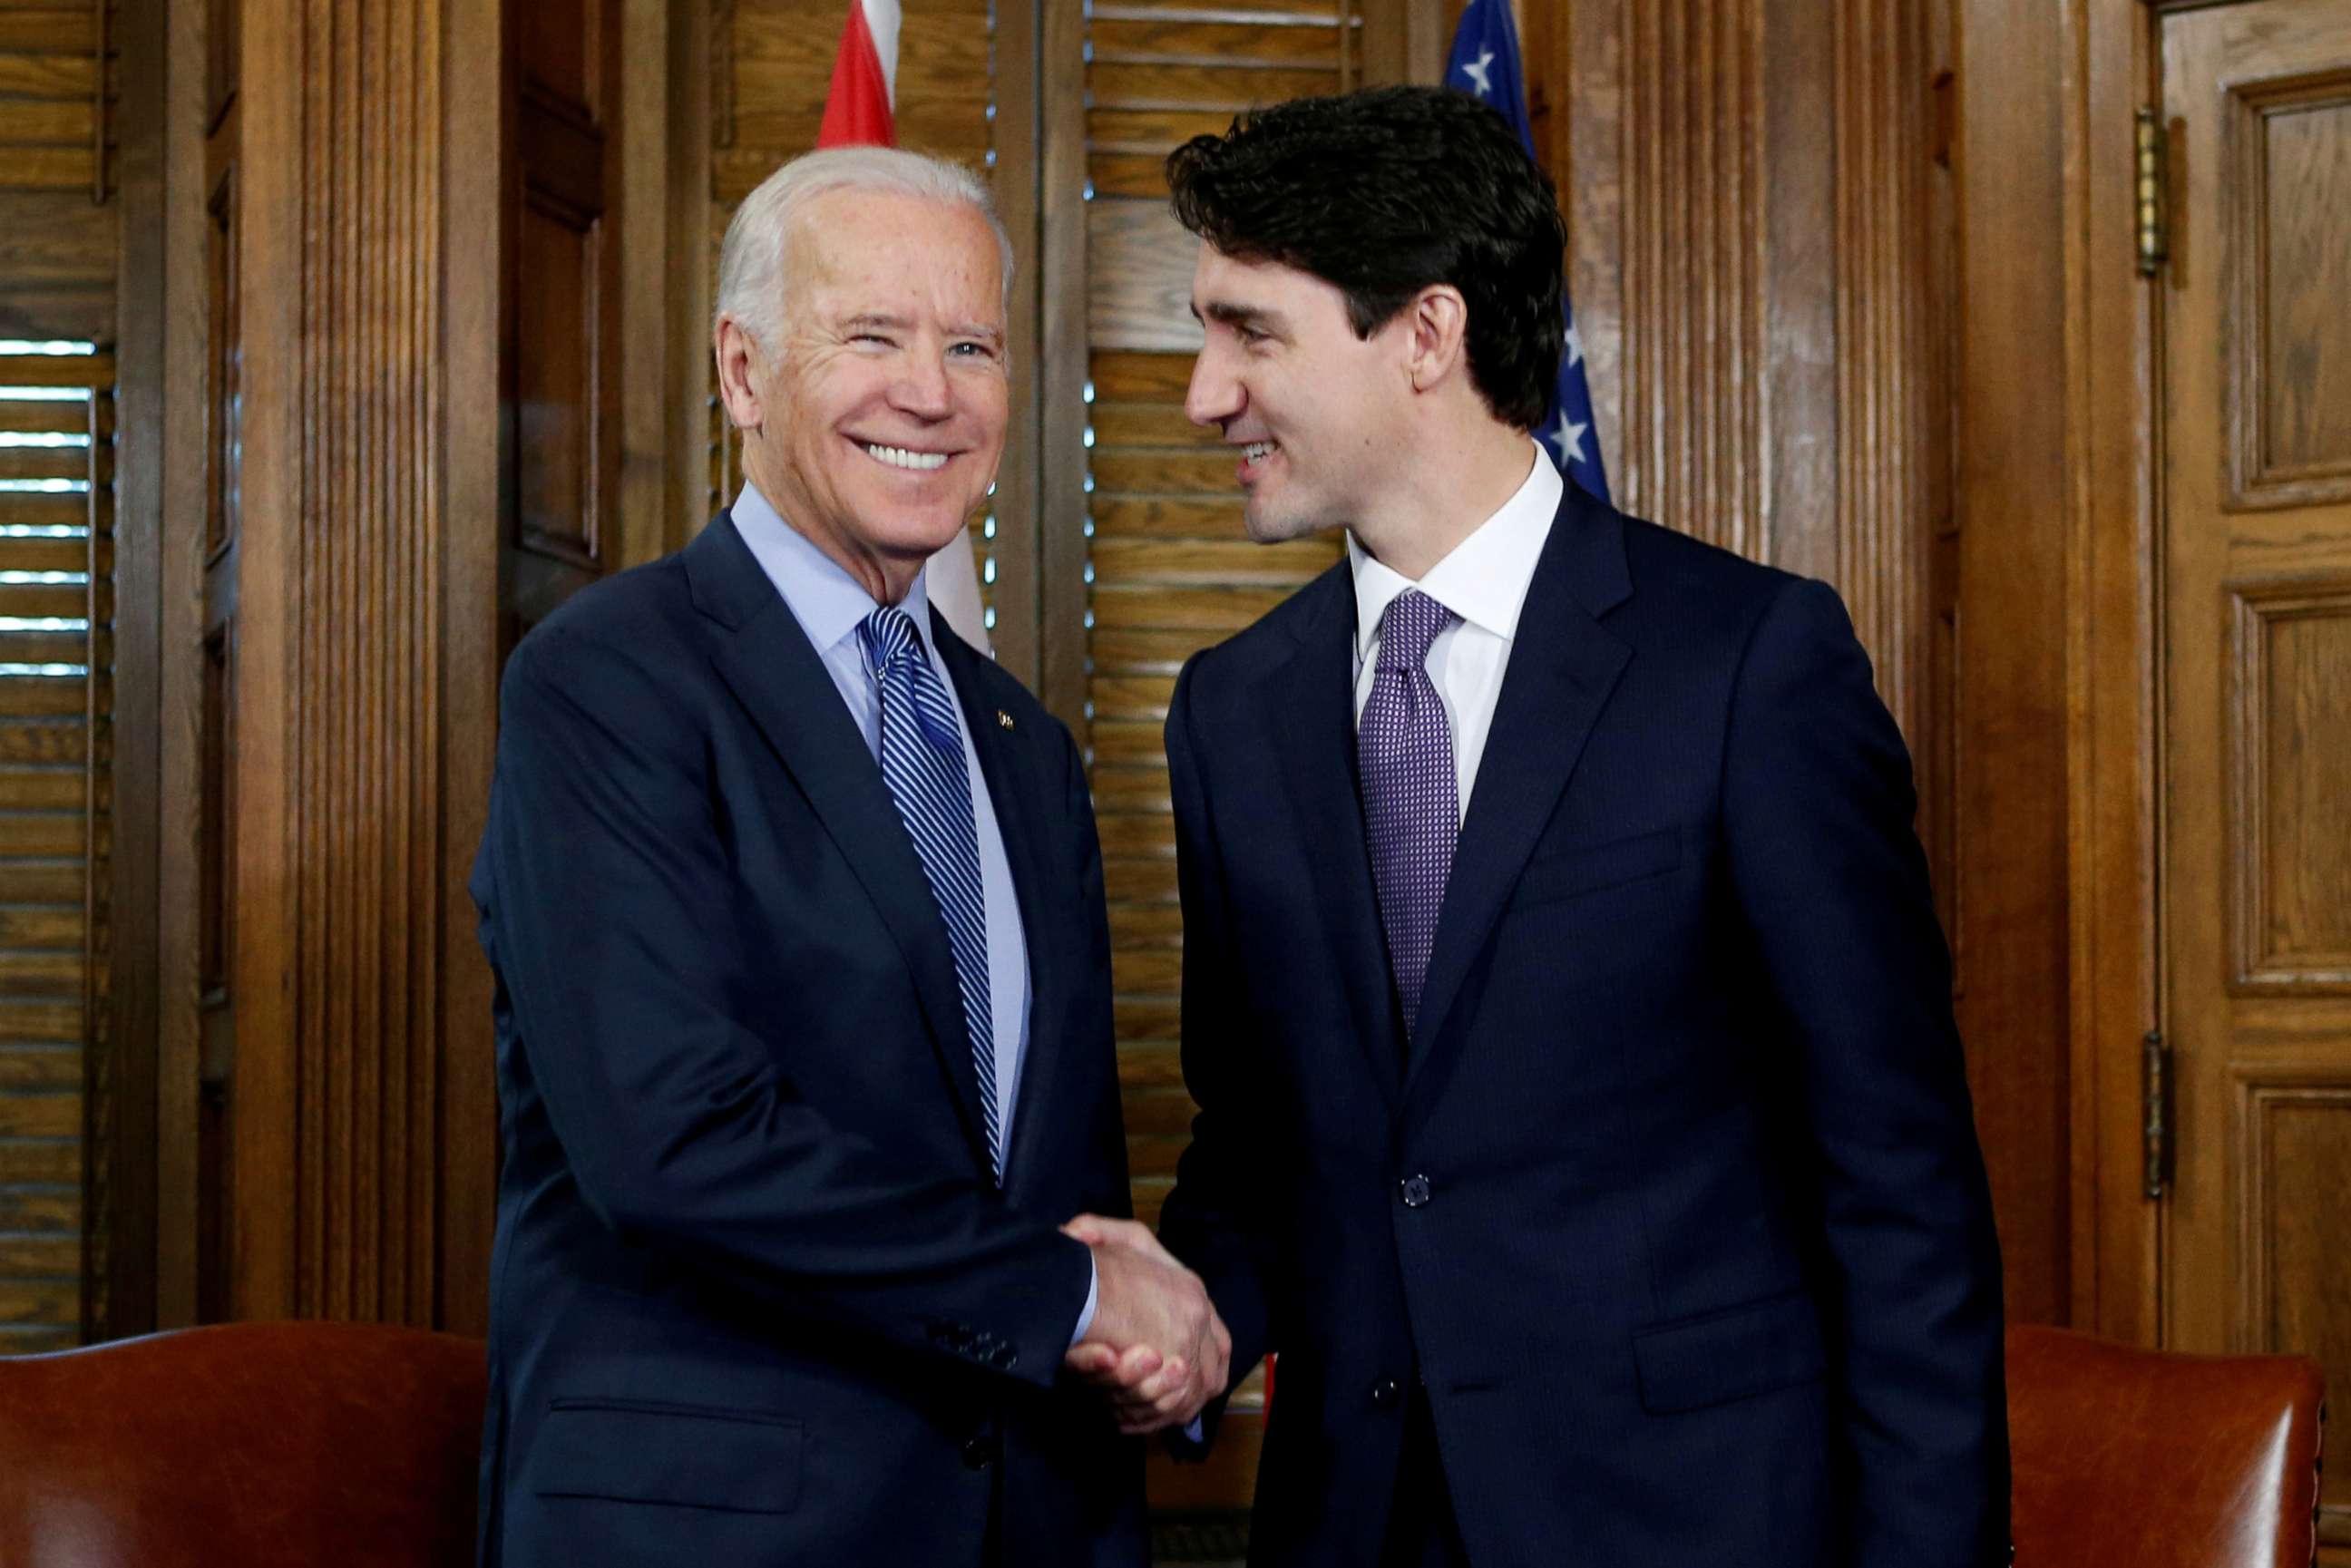 PHOTO: Canada's Prime Minister Justin Trudeau shakes hands with Vice President Joe Biden during a meeting in Trudeau's office on Parliament Hill in Ottawa, Ontario, Canada, Dec. 9, 2016.